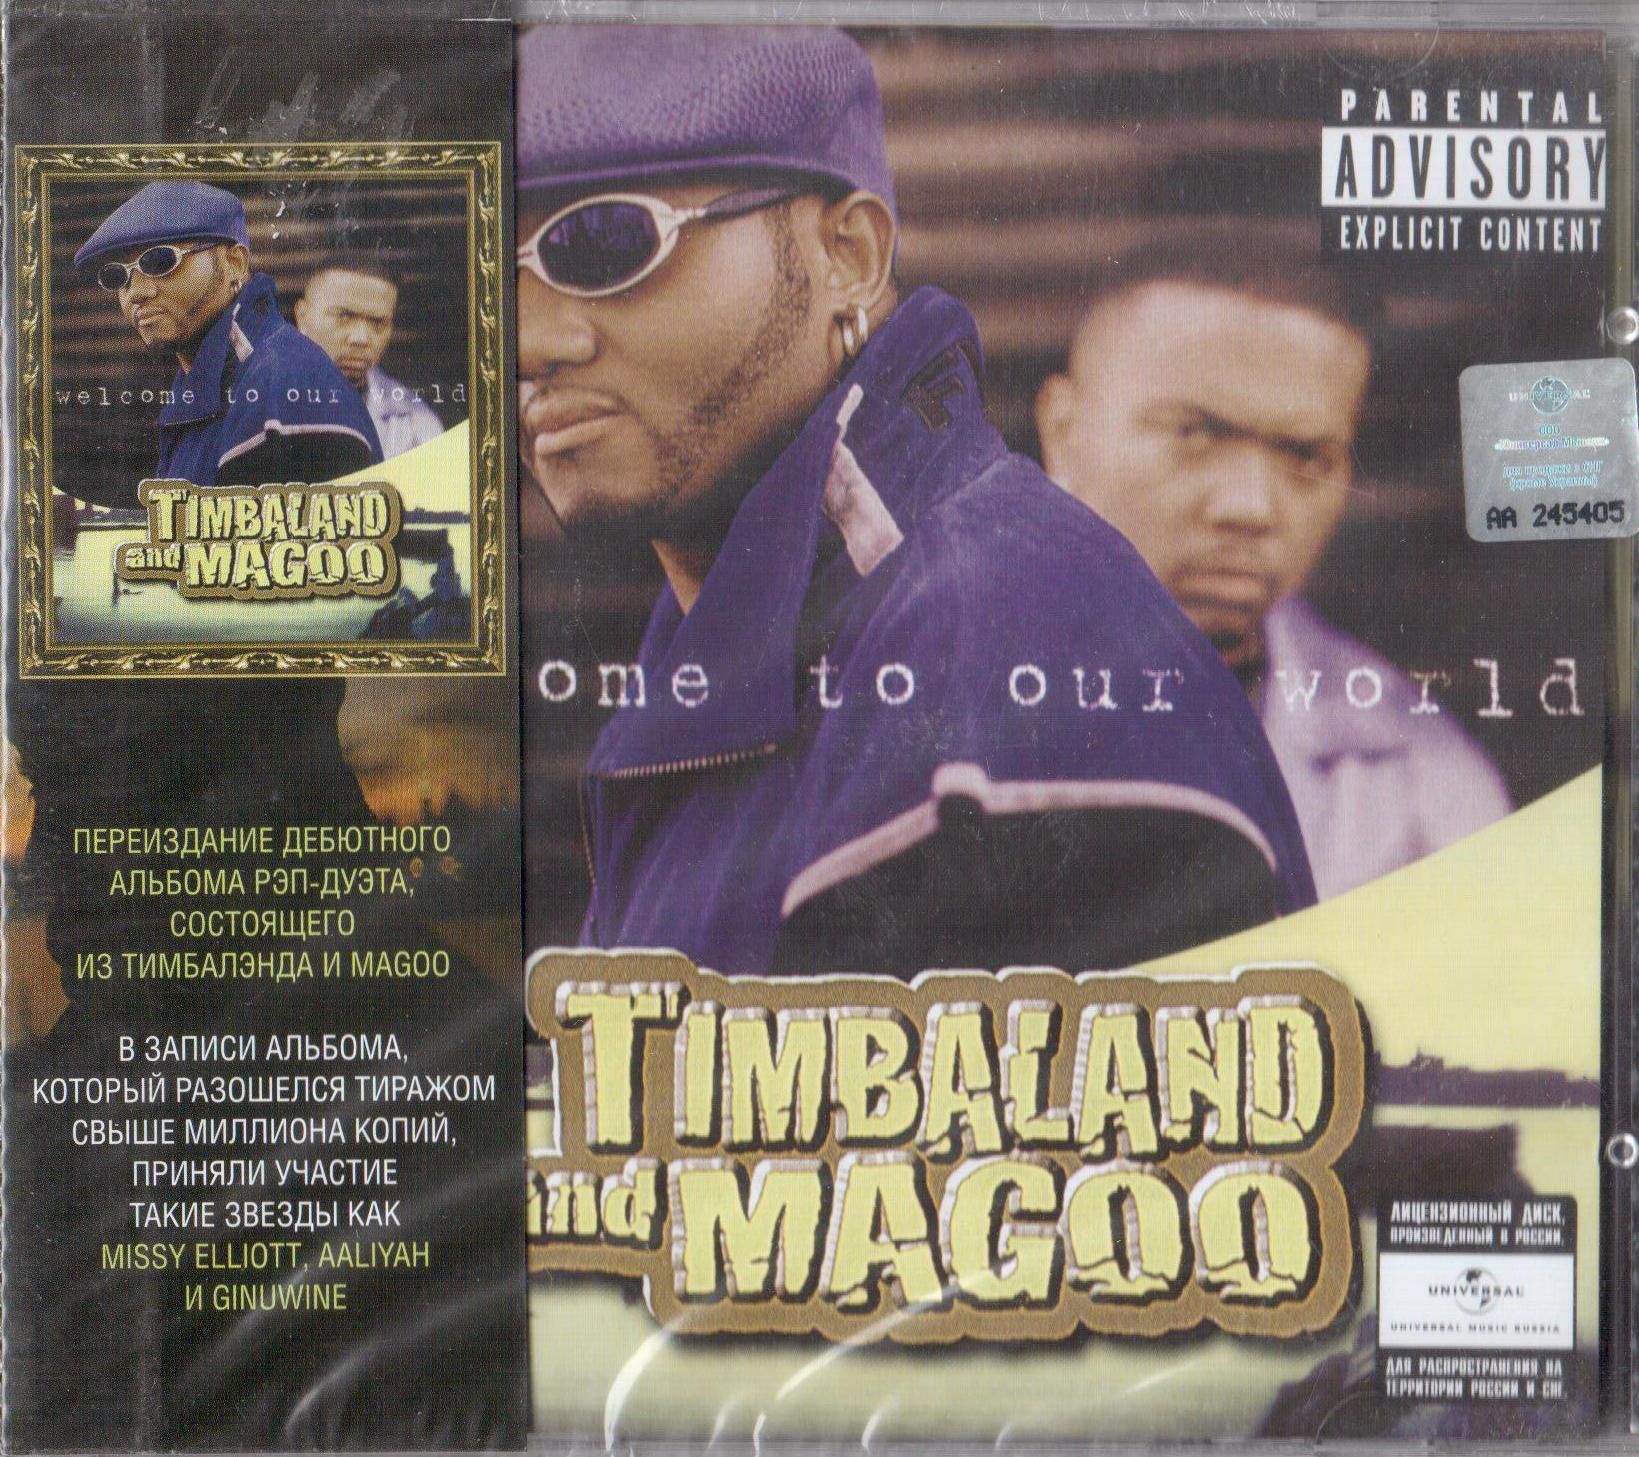 Timbaland And Magoo — Welcome To Our World